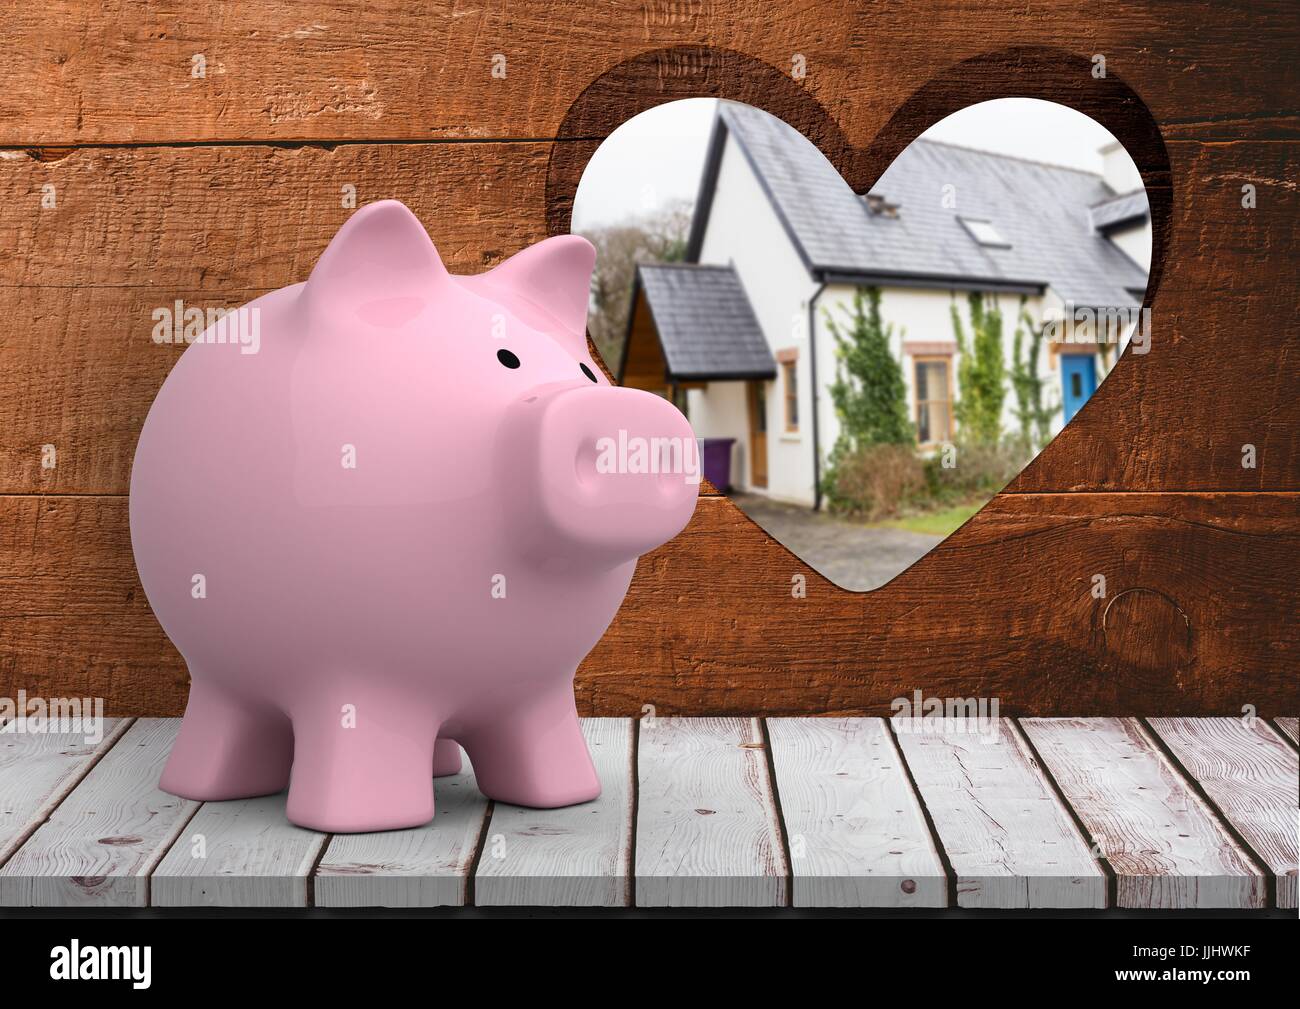 3D pink piggy bank in front of wood with heart hole where we can see a house blue door(blurred) Stock Photo